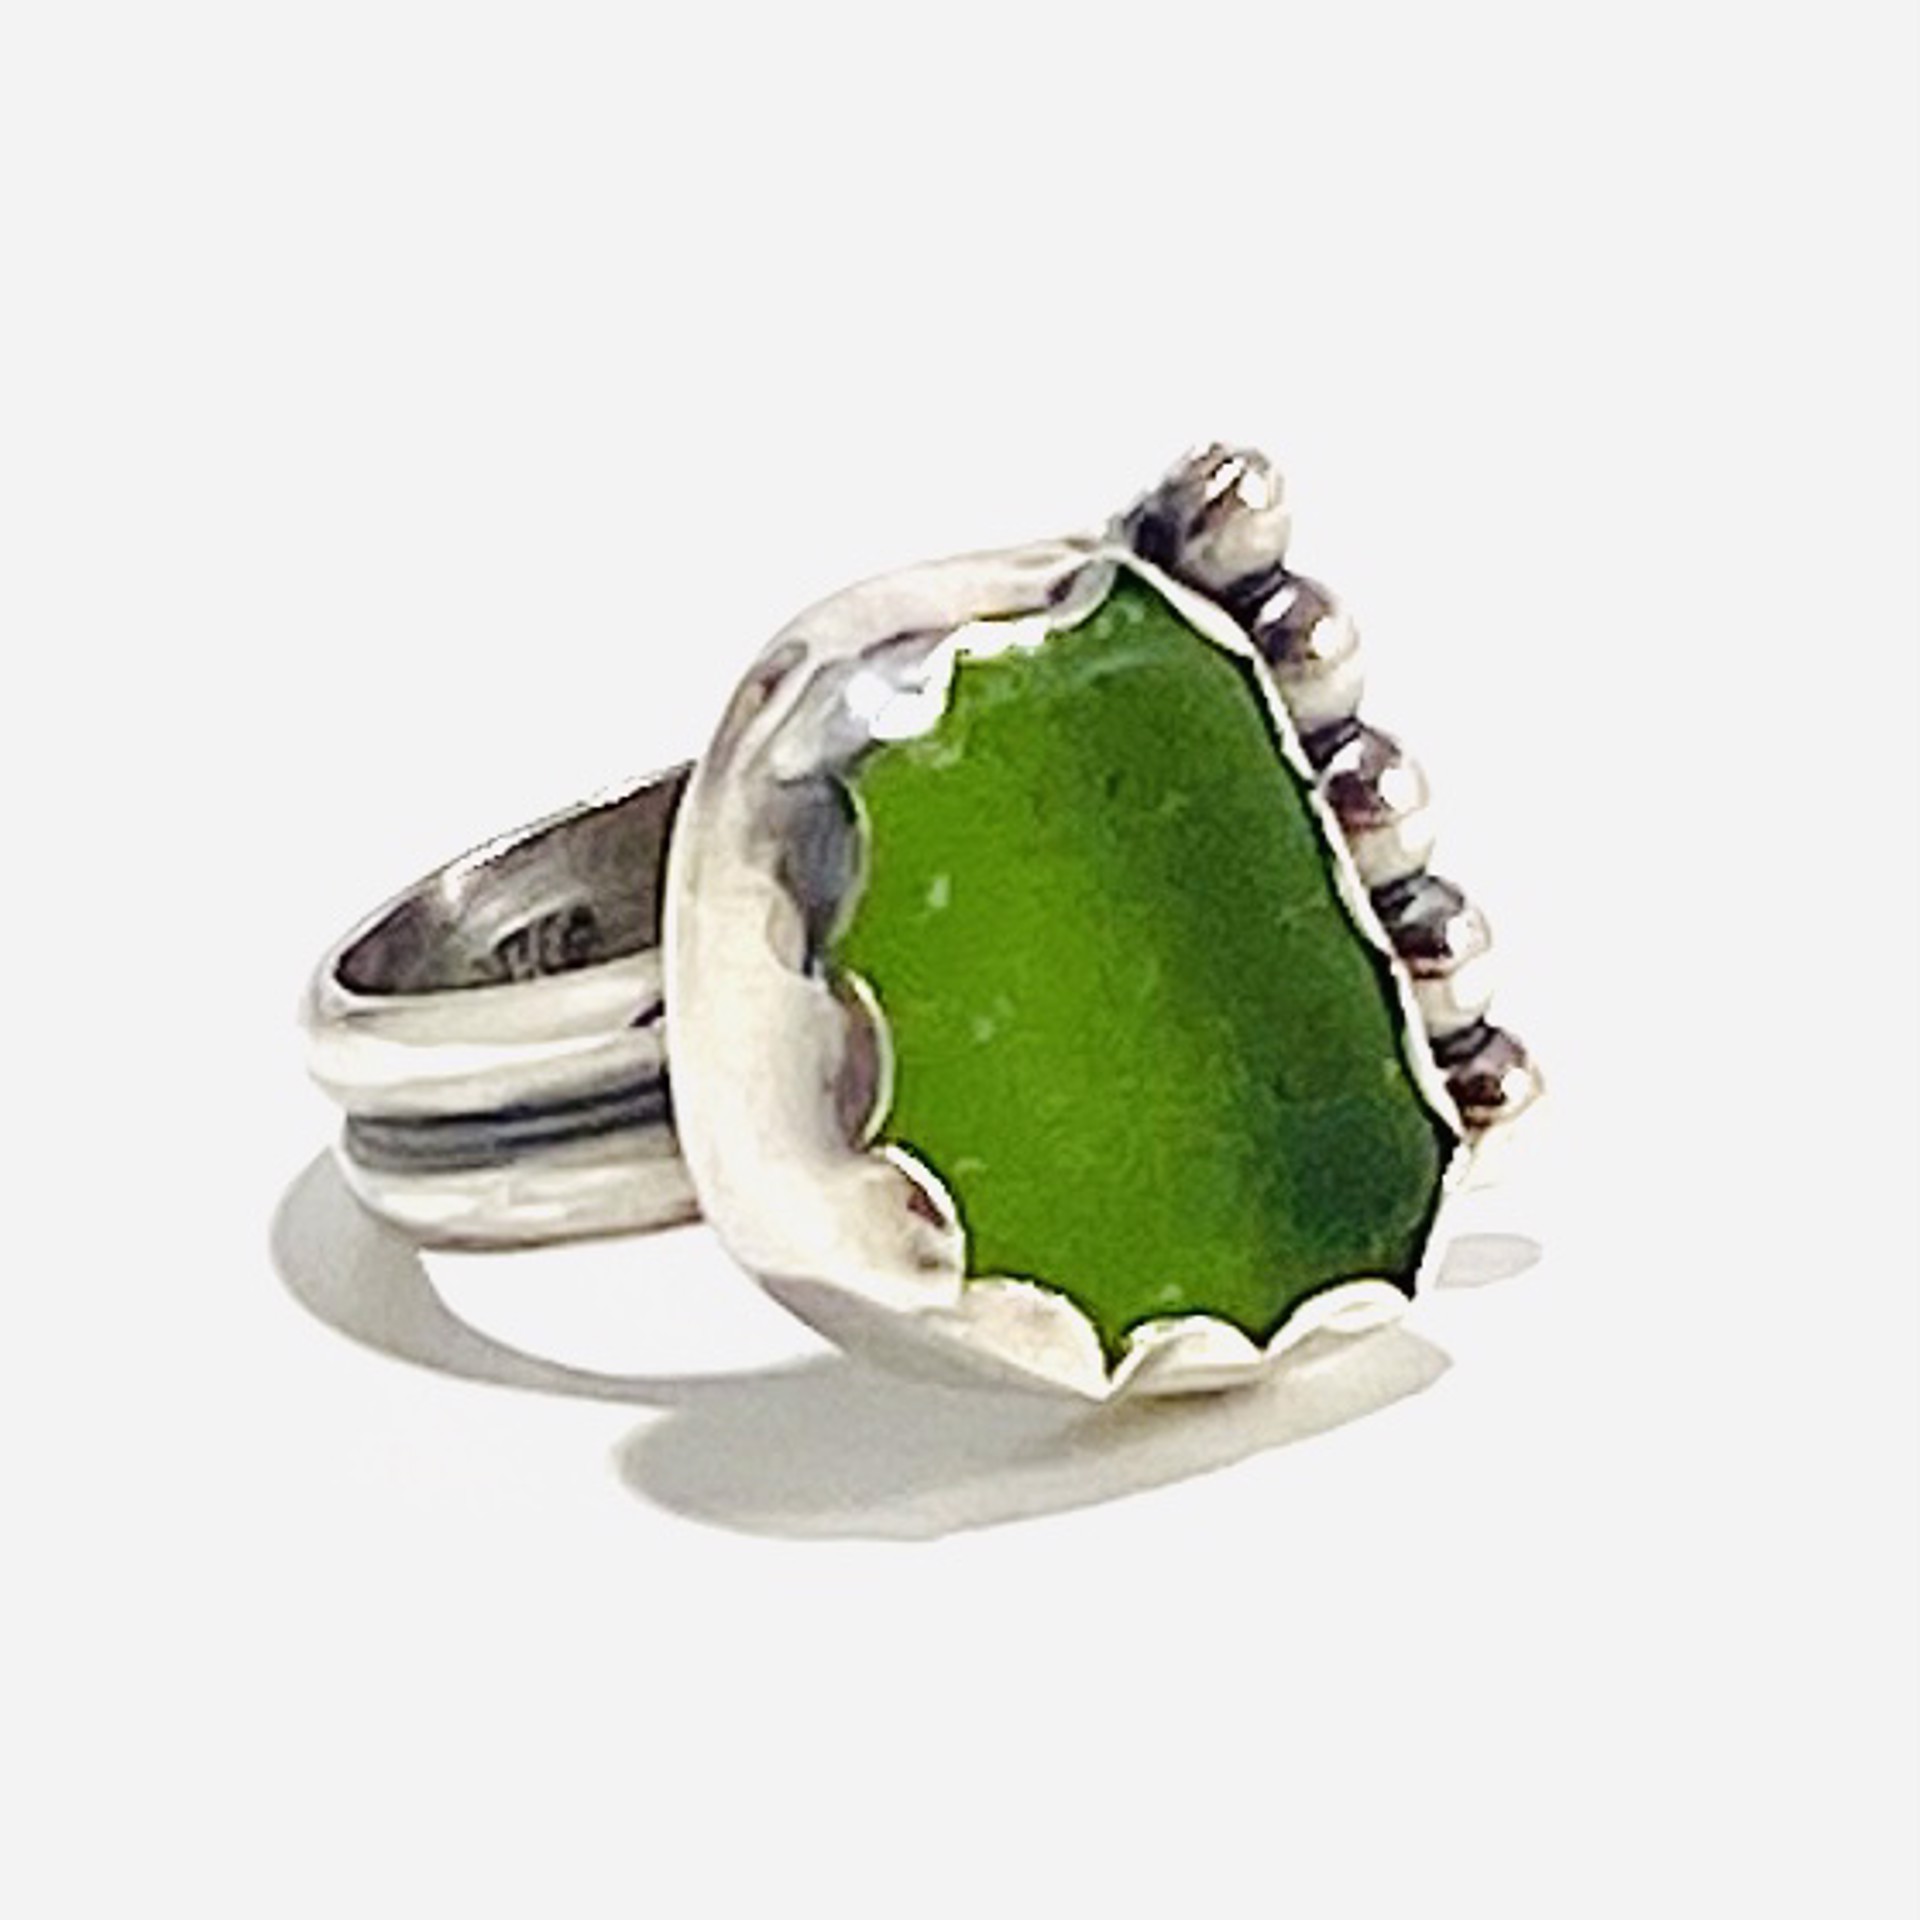 Dark Green Sea Glass Five Bead Accent Ring sz6.75 AB23-12 by Anne Bivens